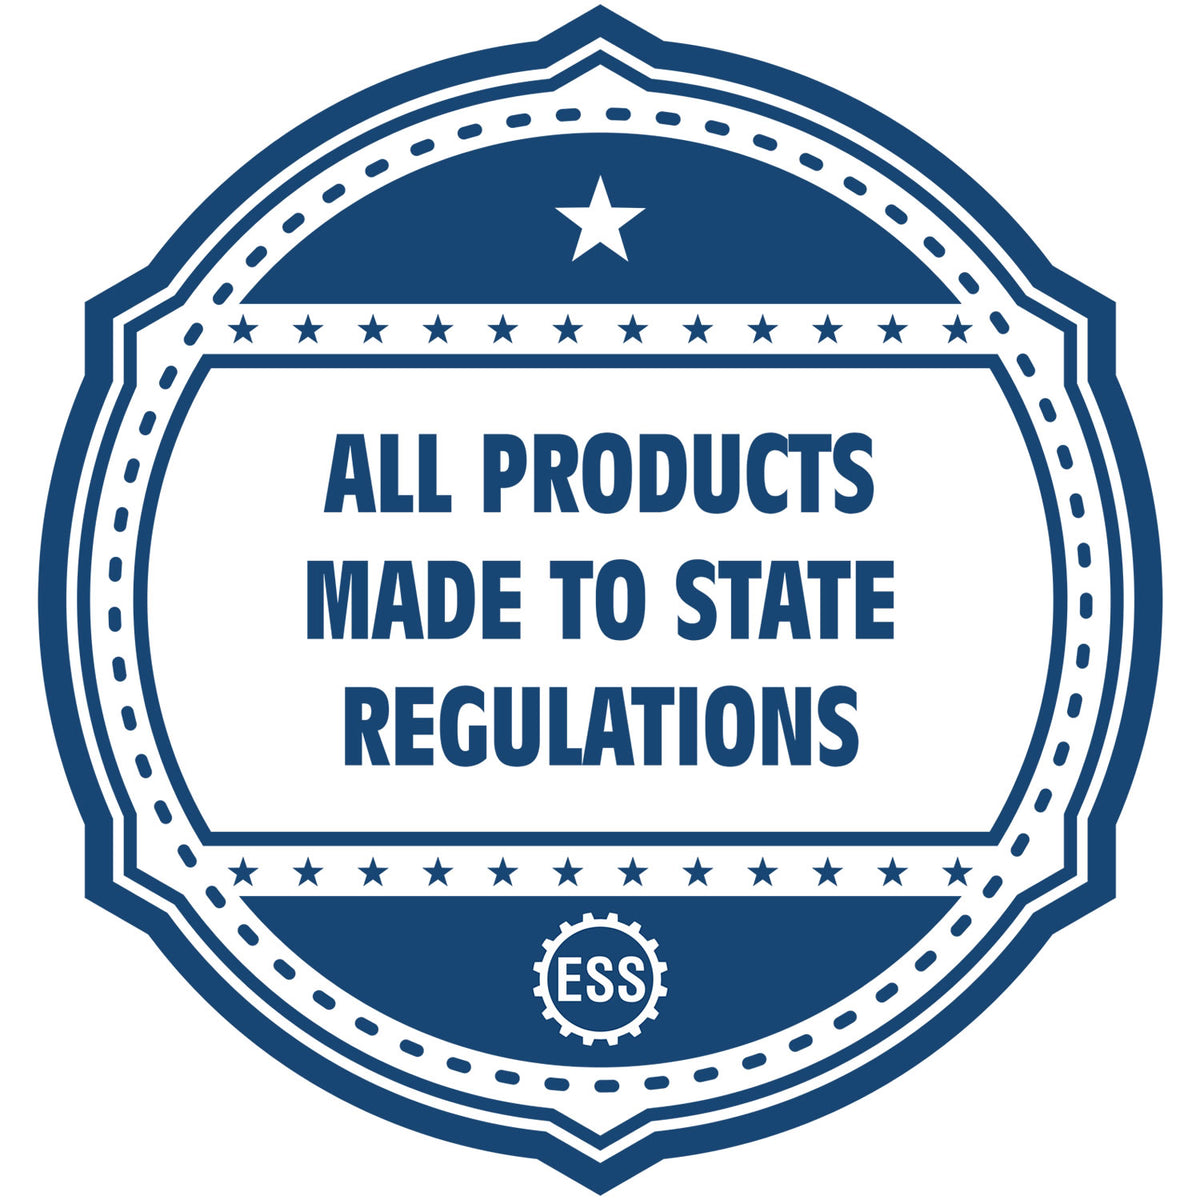 An icon or badge element for the State of Arkansas Soft Land Surveyor Embossing Seal showing that this product is made in compliance with state regulations.